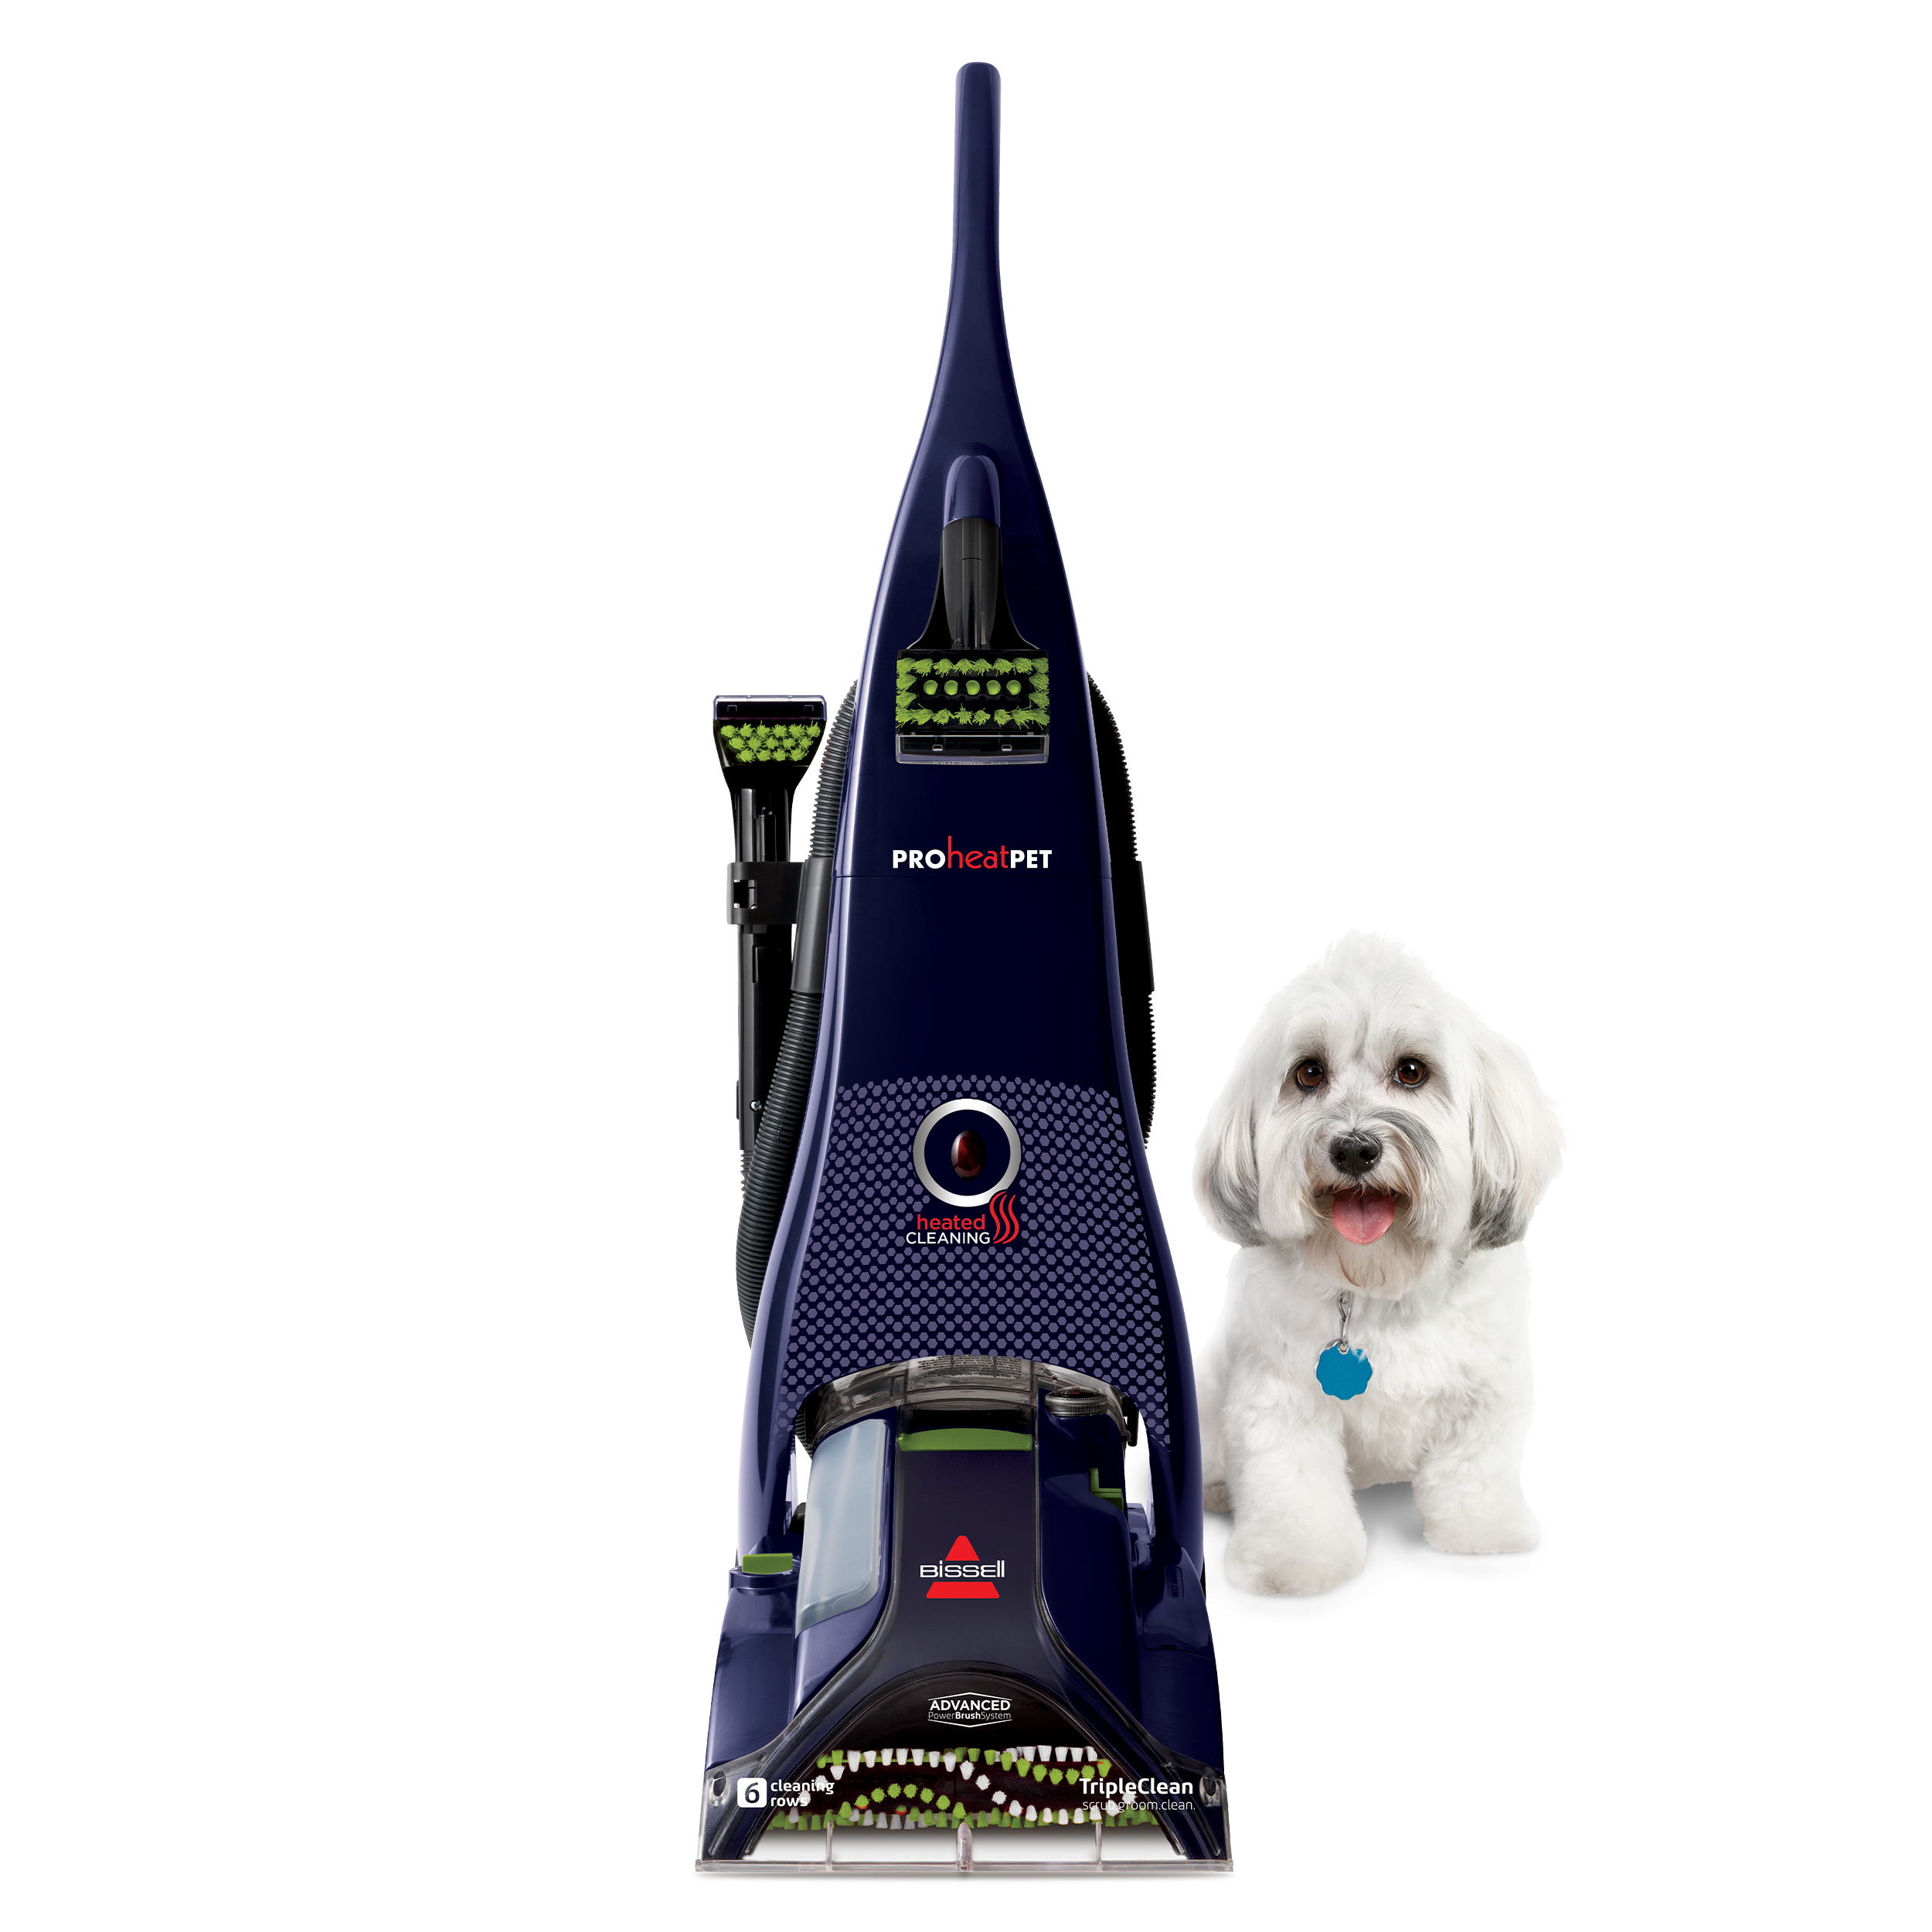 BISSELL 1799 ProHeat Pet Advanced Full-Size Carpet Cleaner